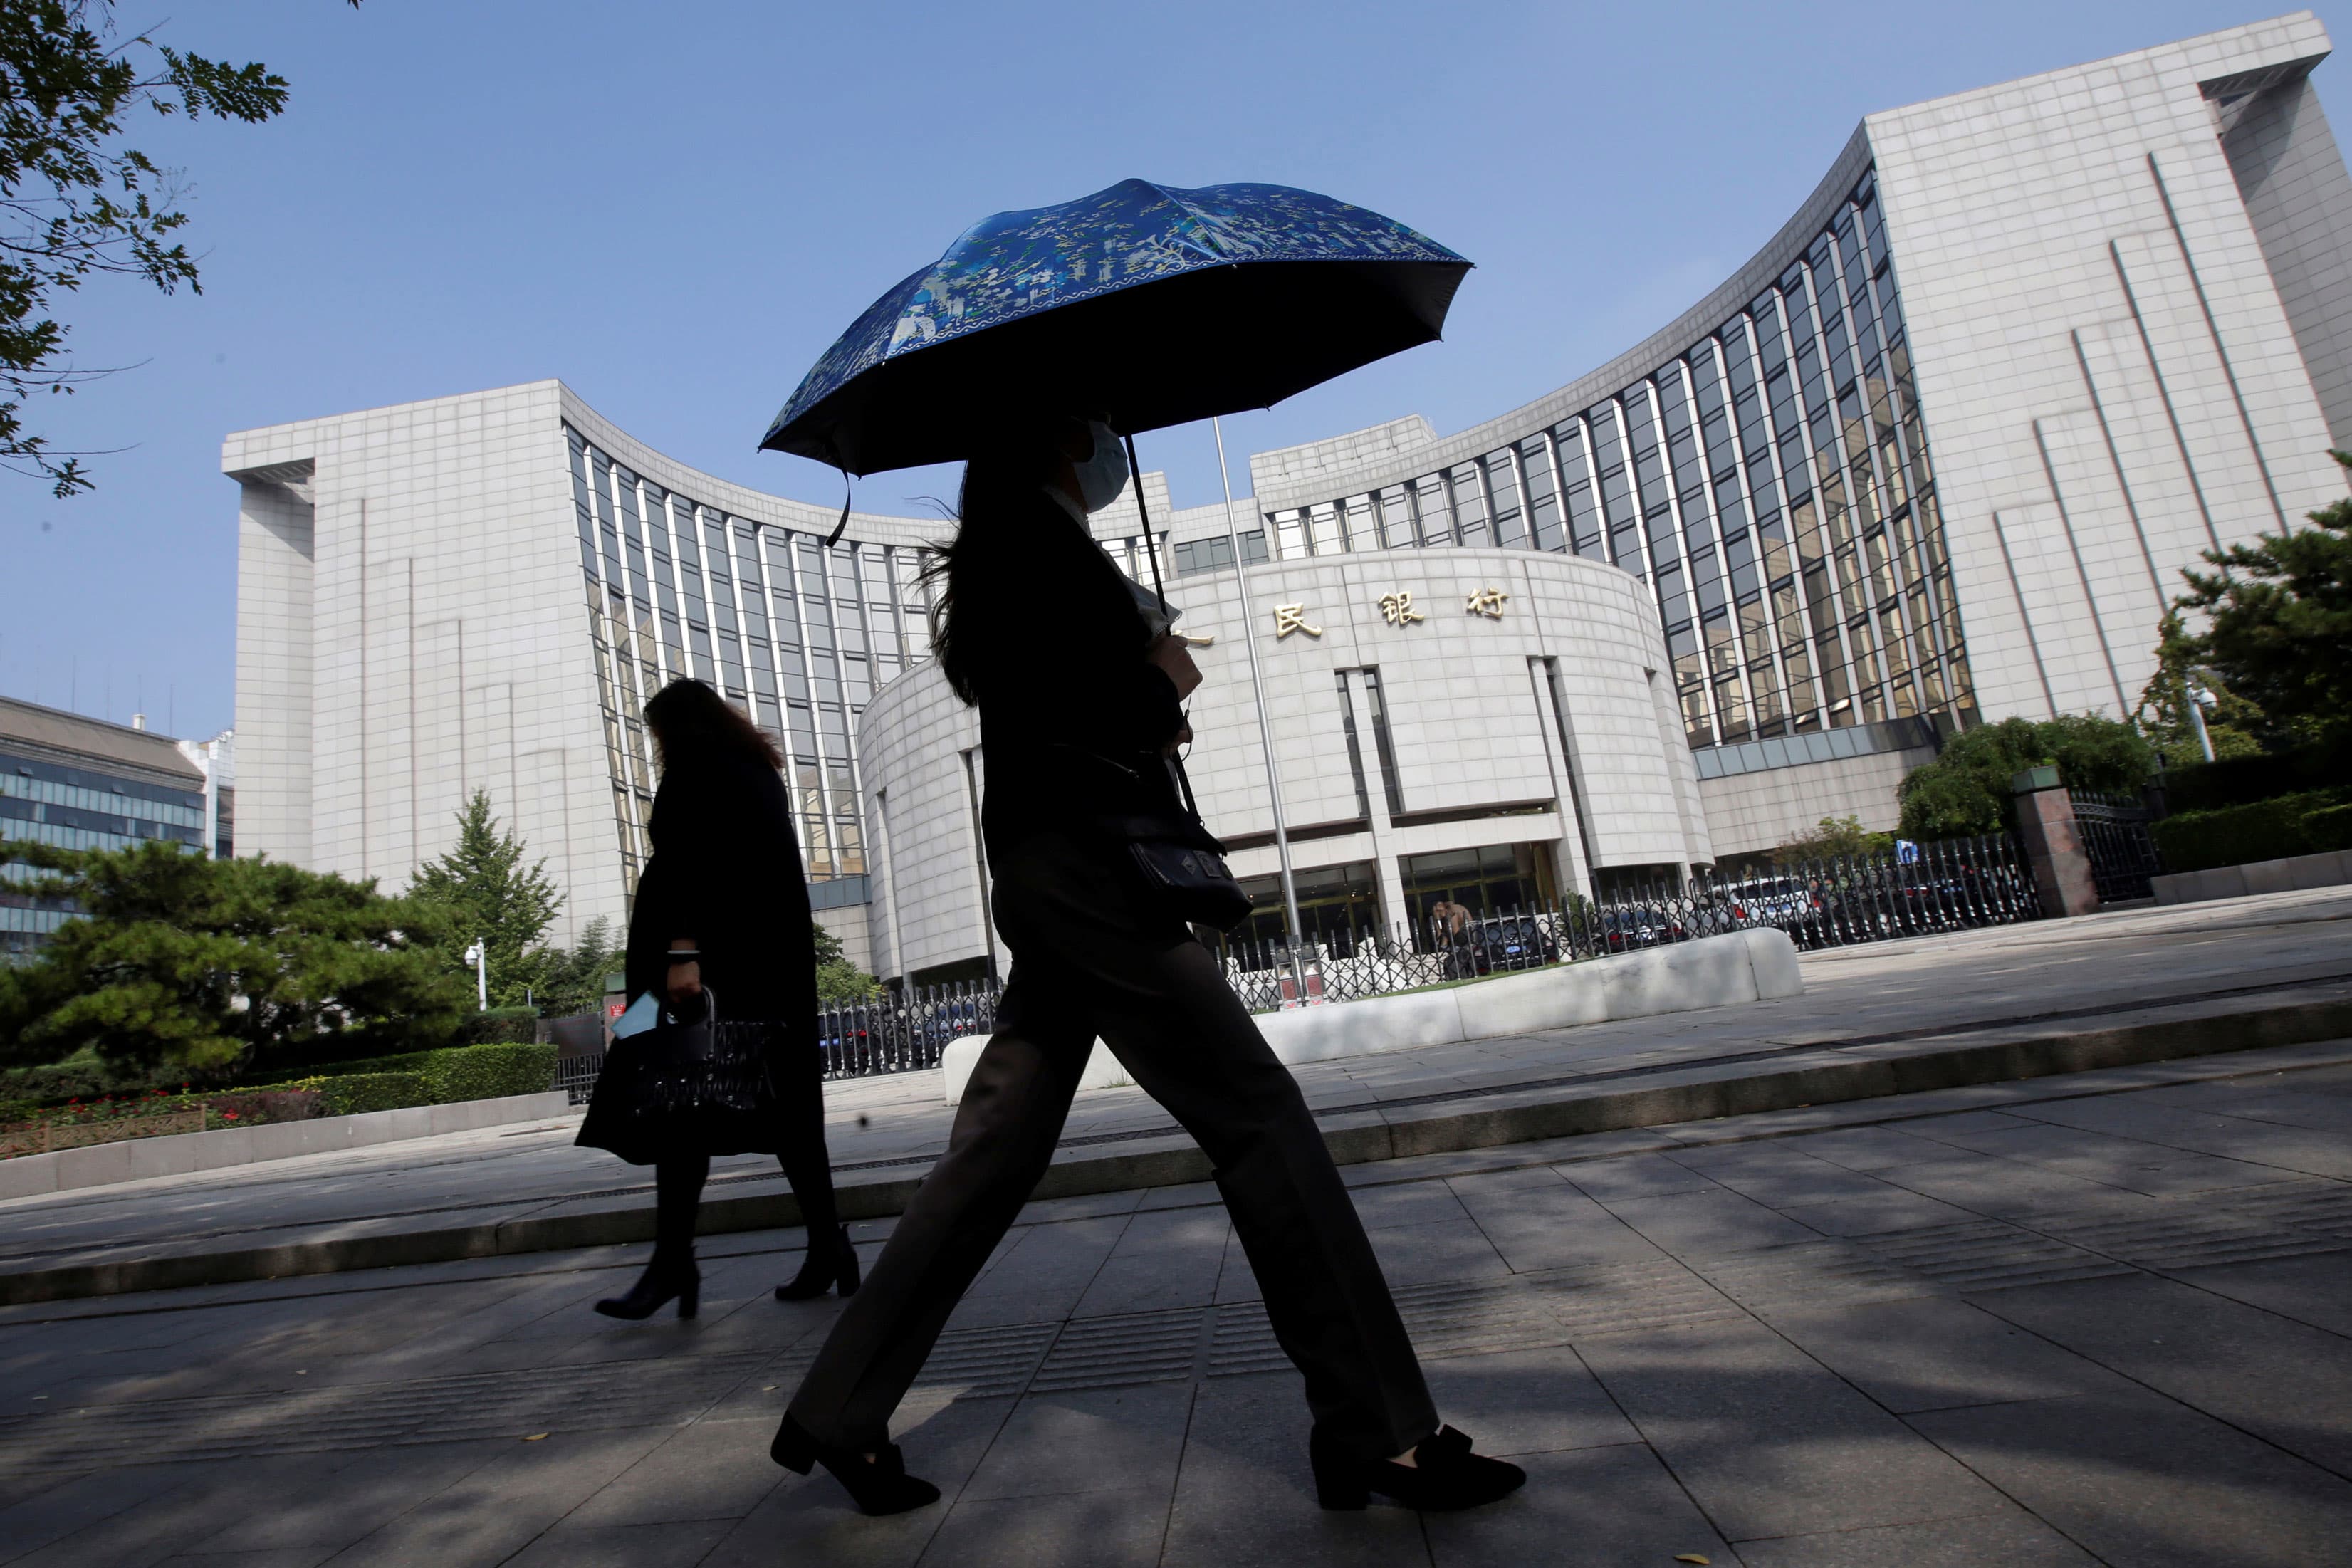 The Central Bank of China (PBOC) document suggests giving up birth limits